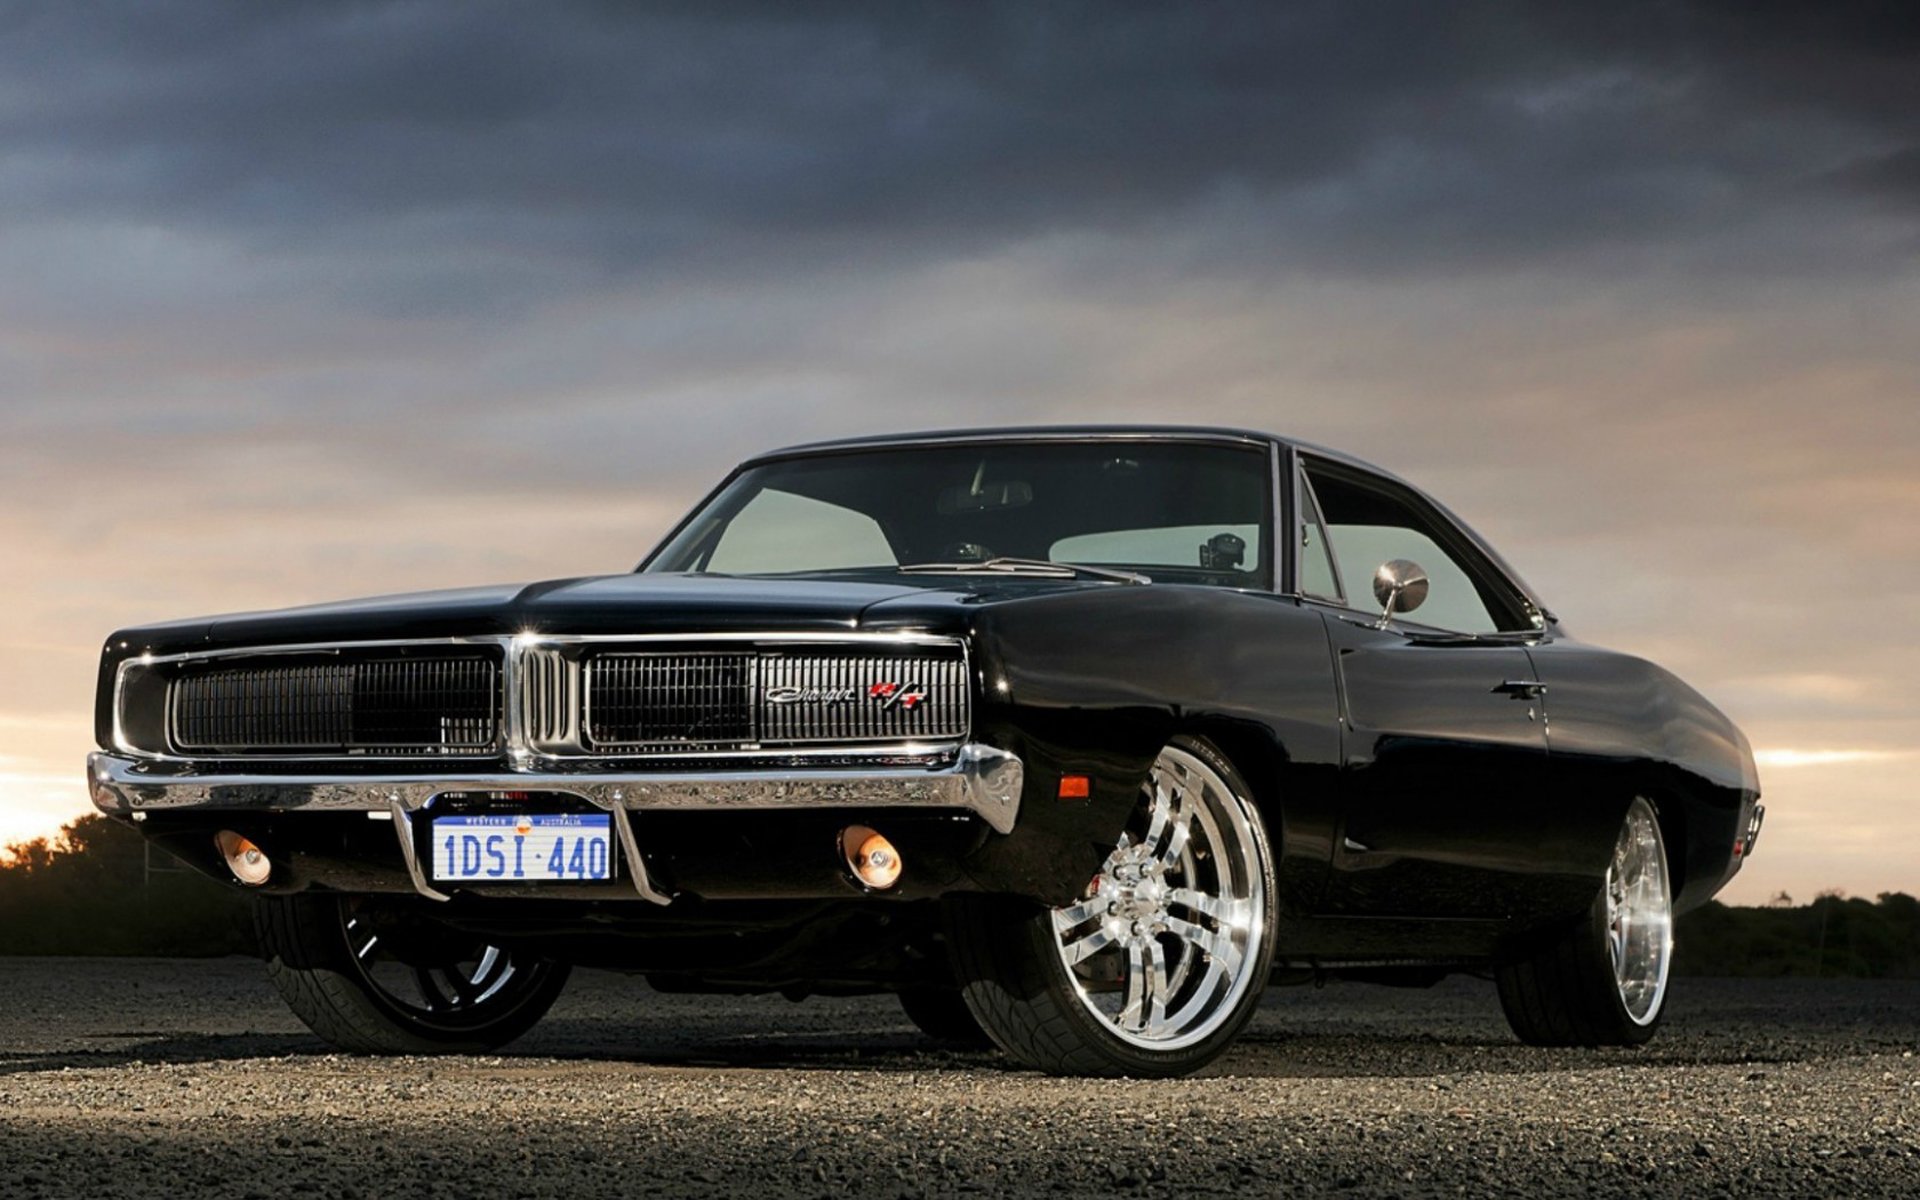 Dodge Charger R/T Full HD Wallpaper and Background Image | 1920x1200